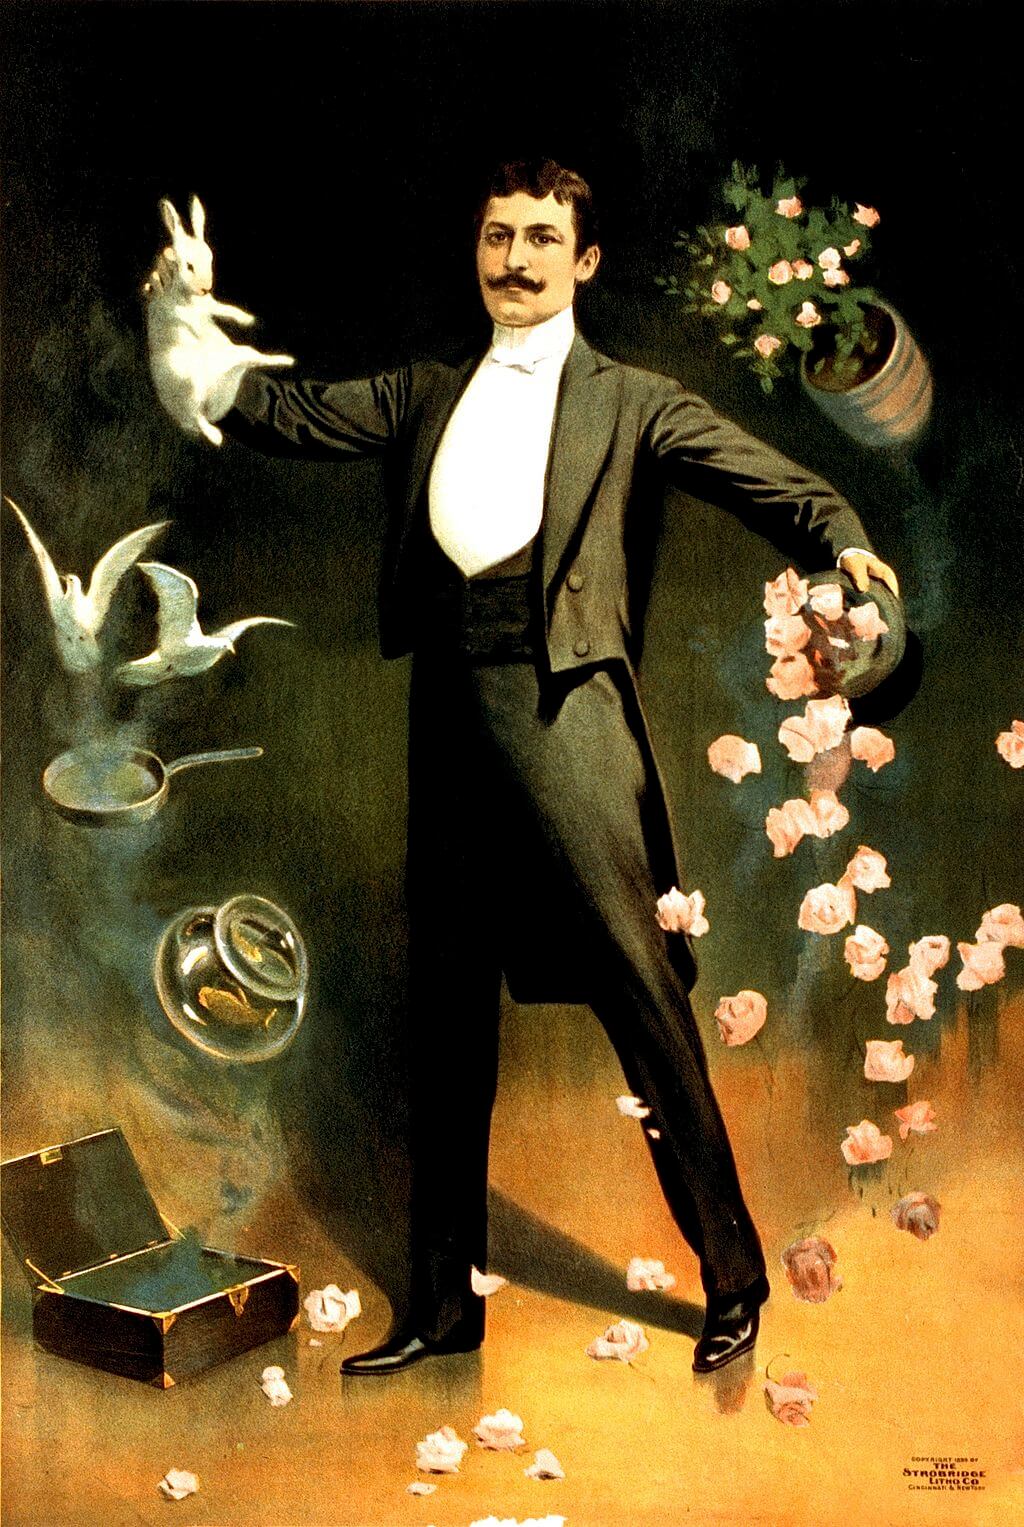 A poster for a magic show by Zan Zig, showing him holding a rabbit